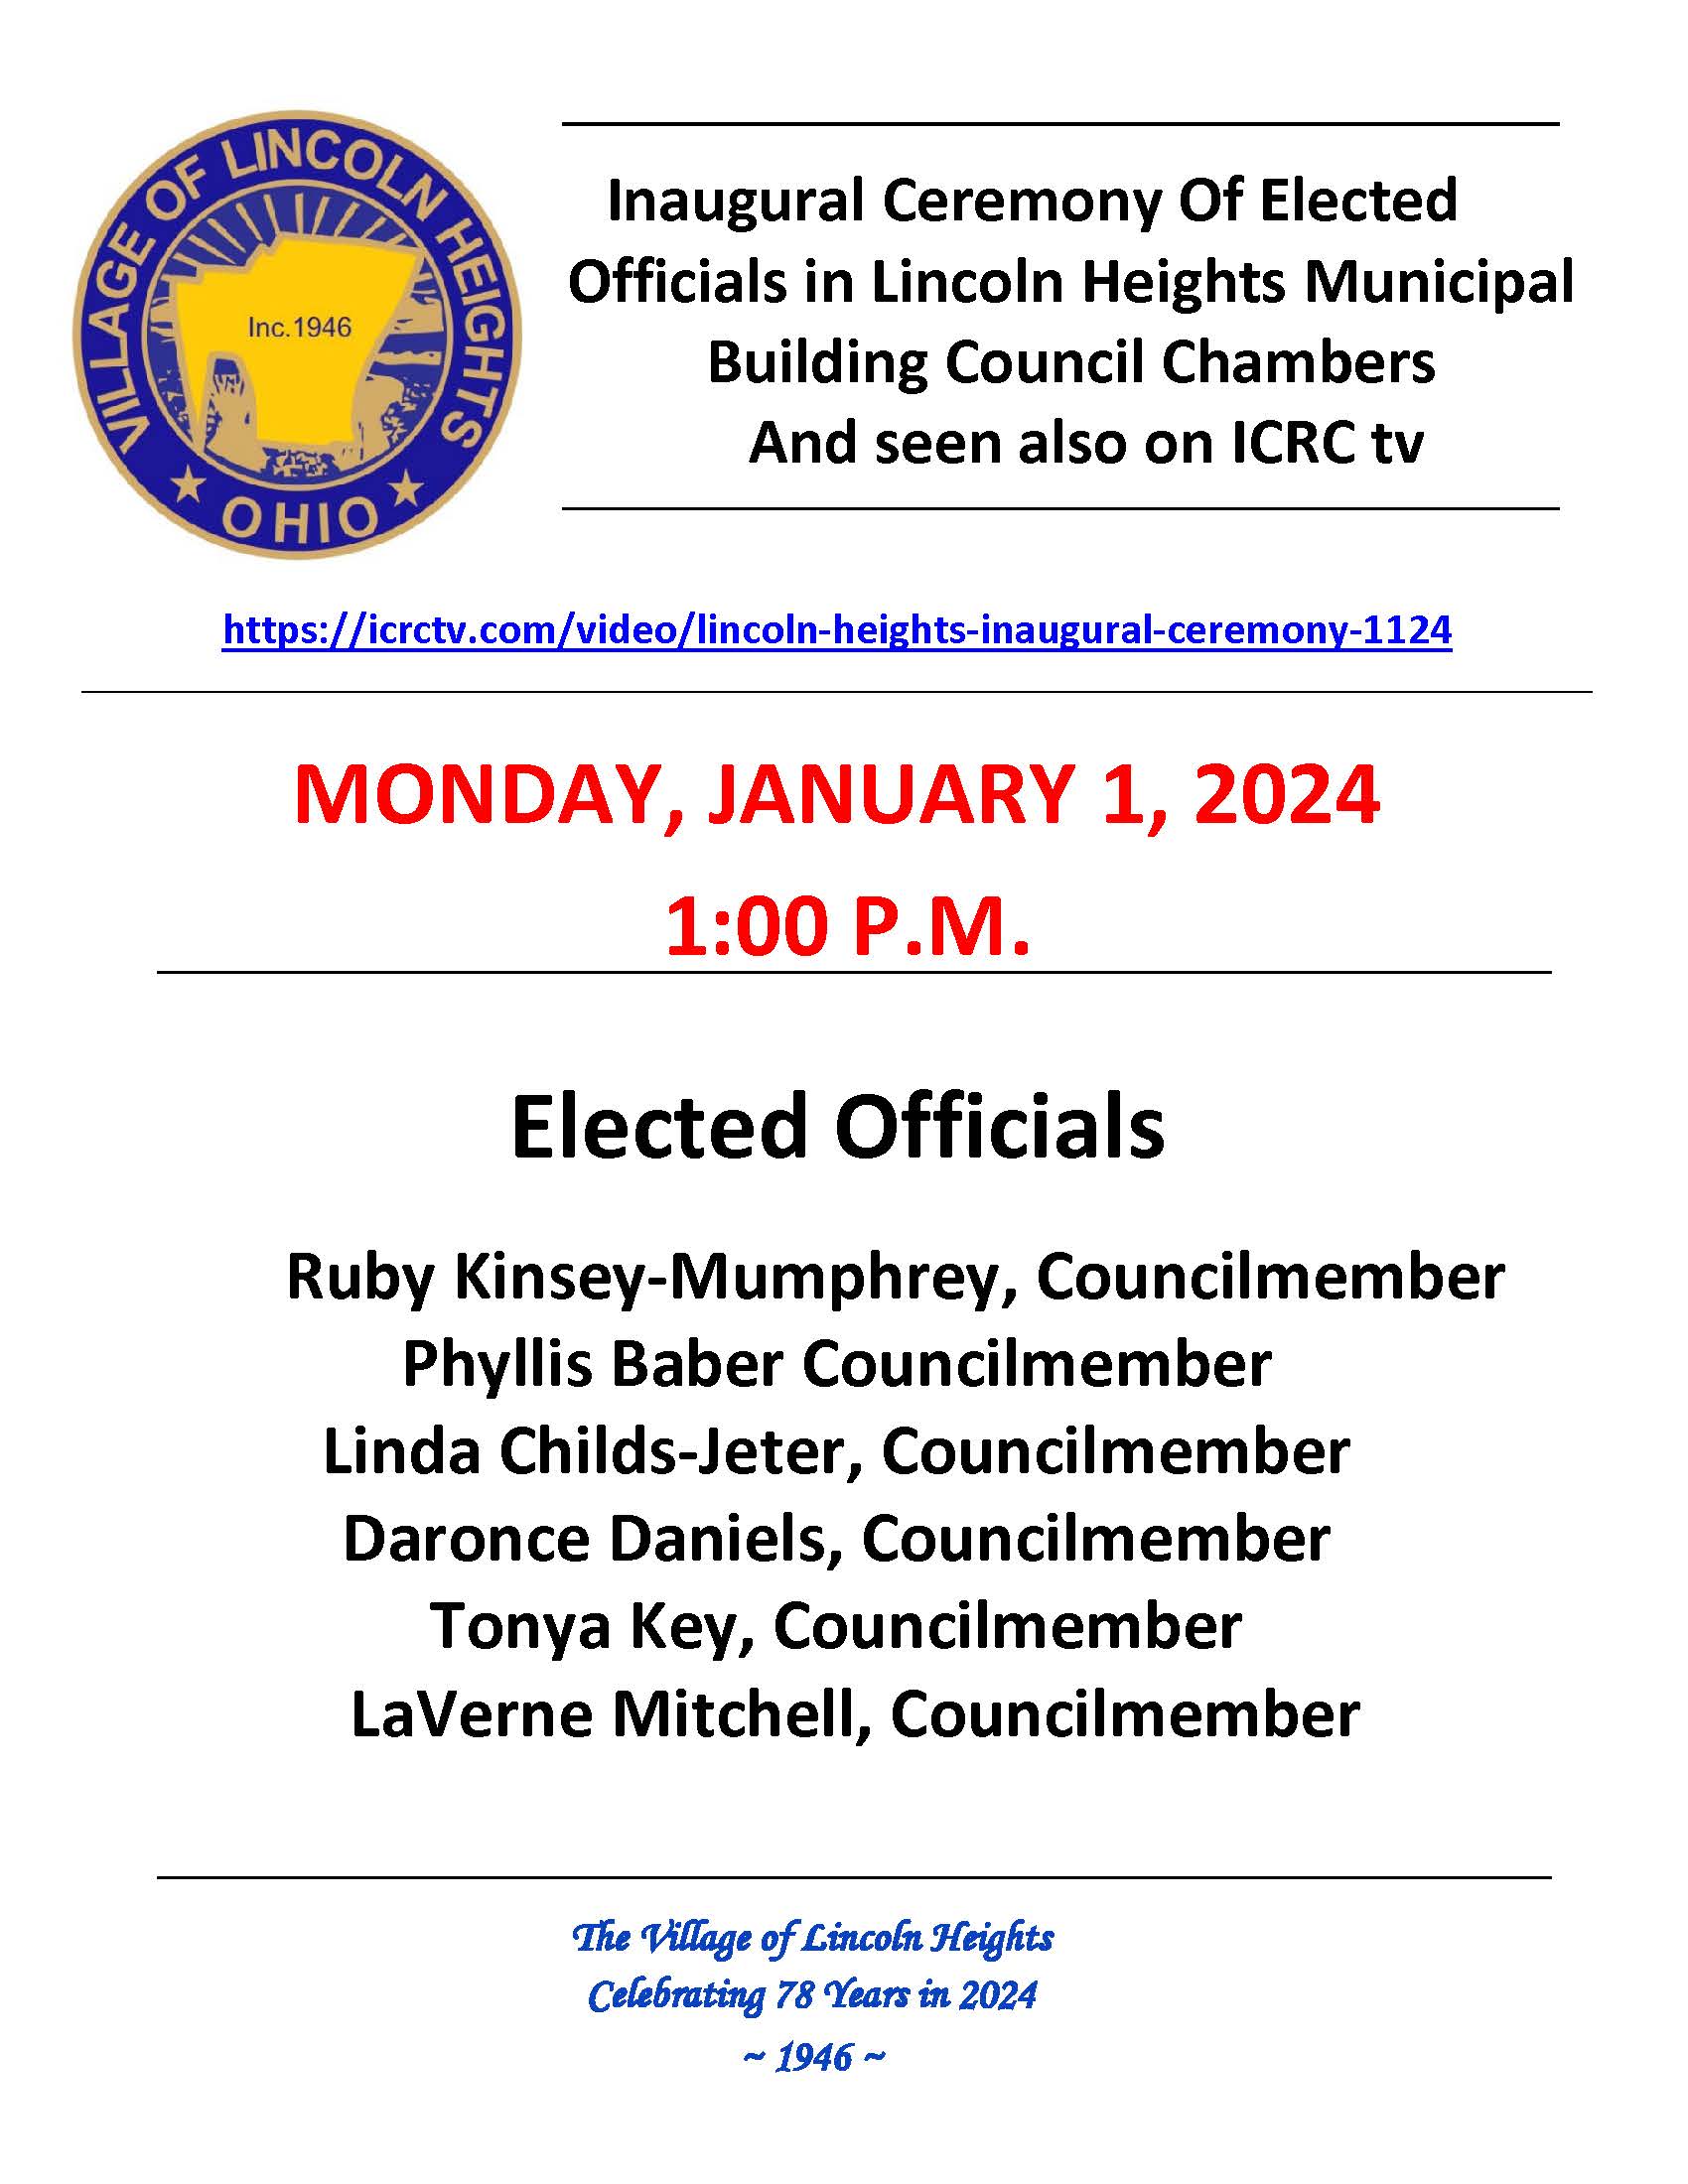 INAUGURAL CEREMONY FLYER for January 1 2024